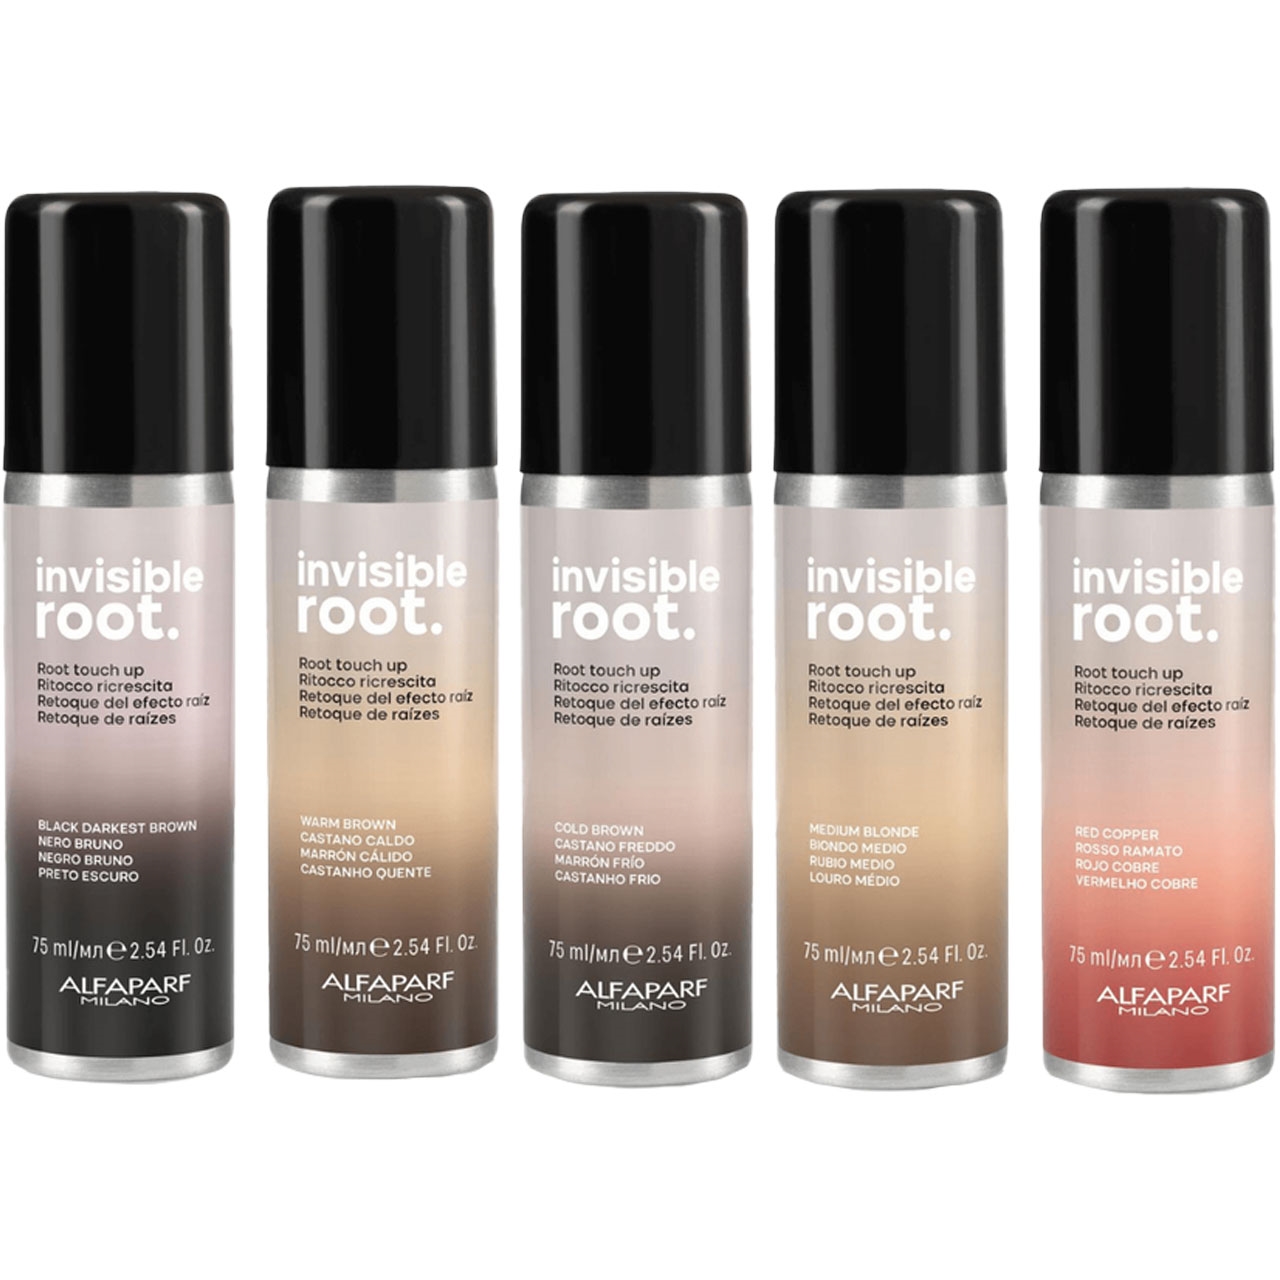 Alfaparf Milano Root touch up spray